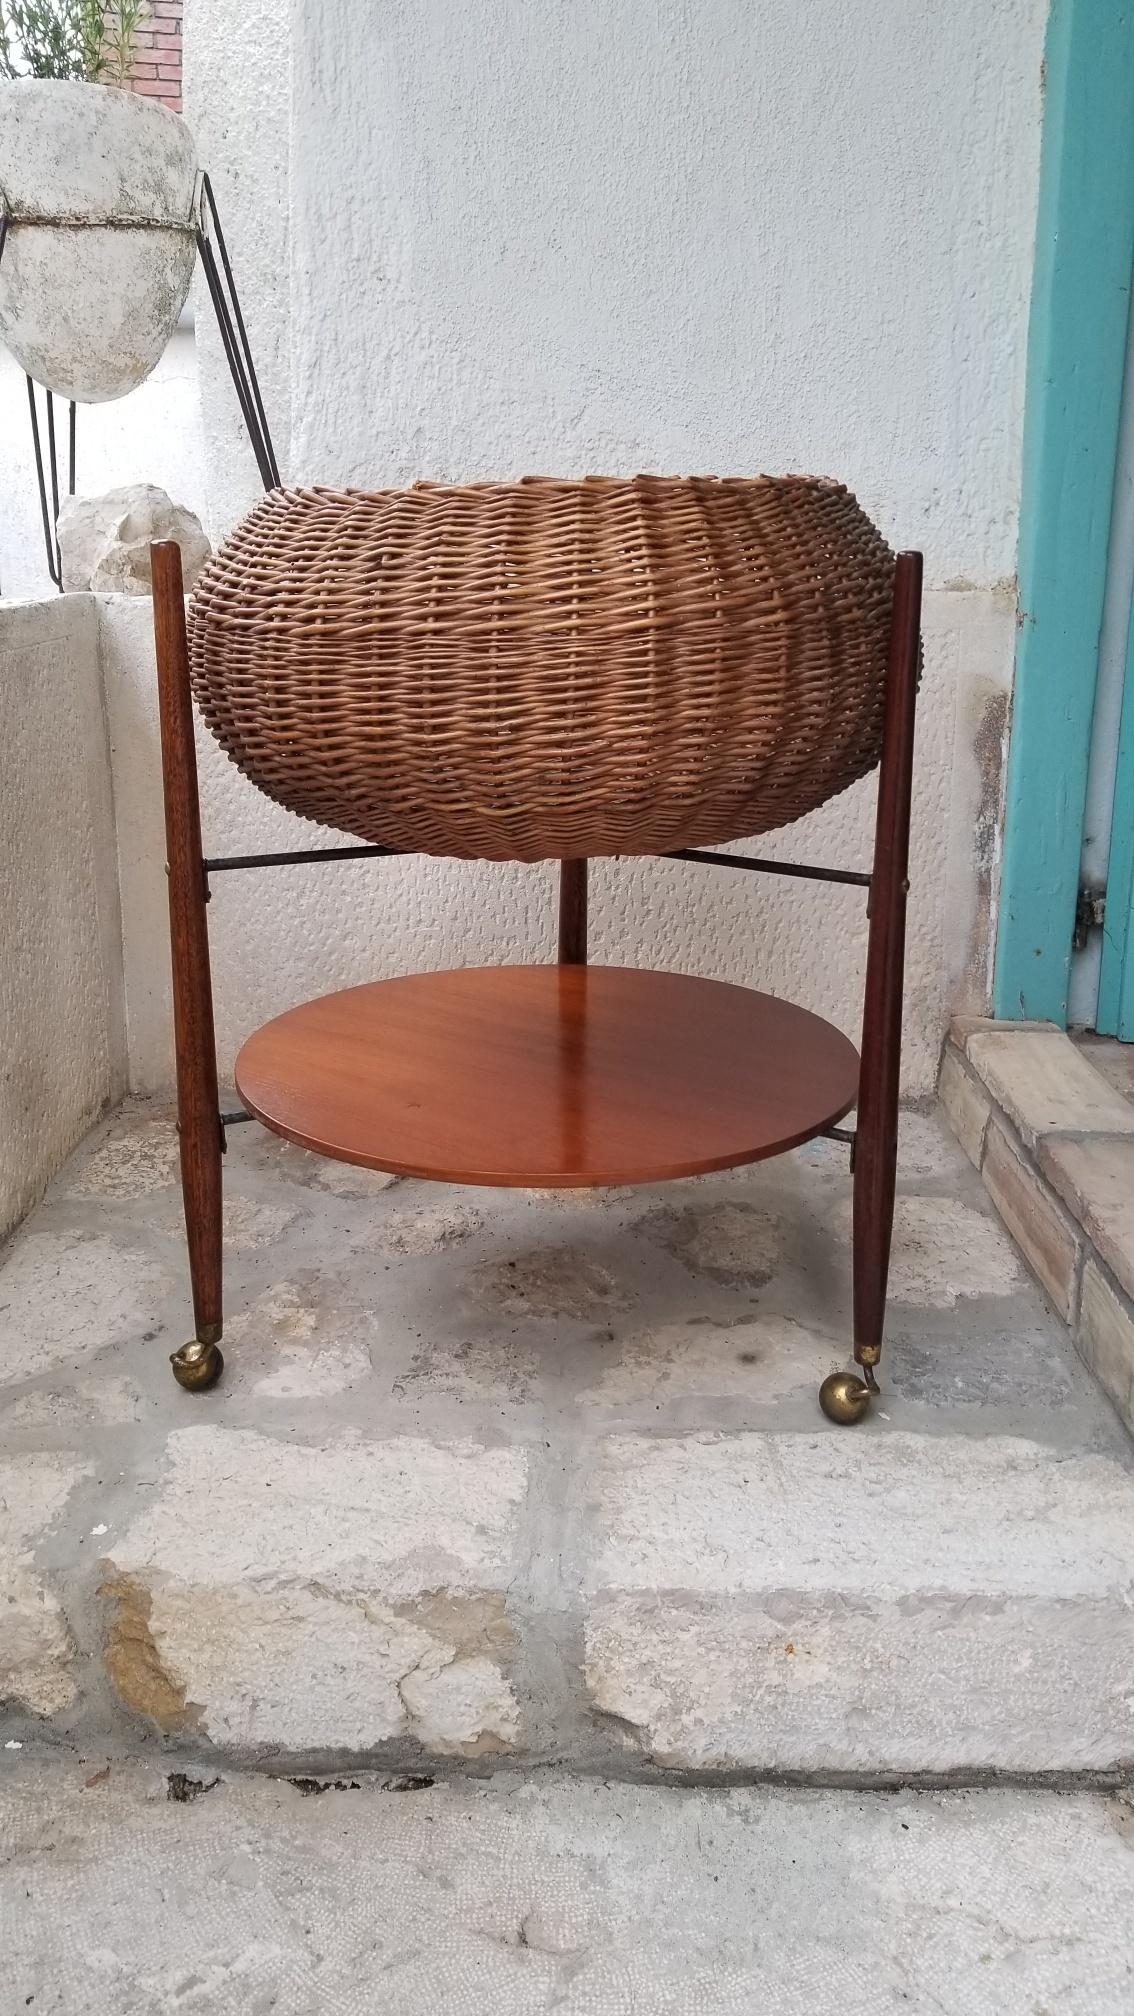 1950s side table or magazine holder made by Mobili Ferara.
 In home delivery US continental $250
 